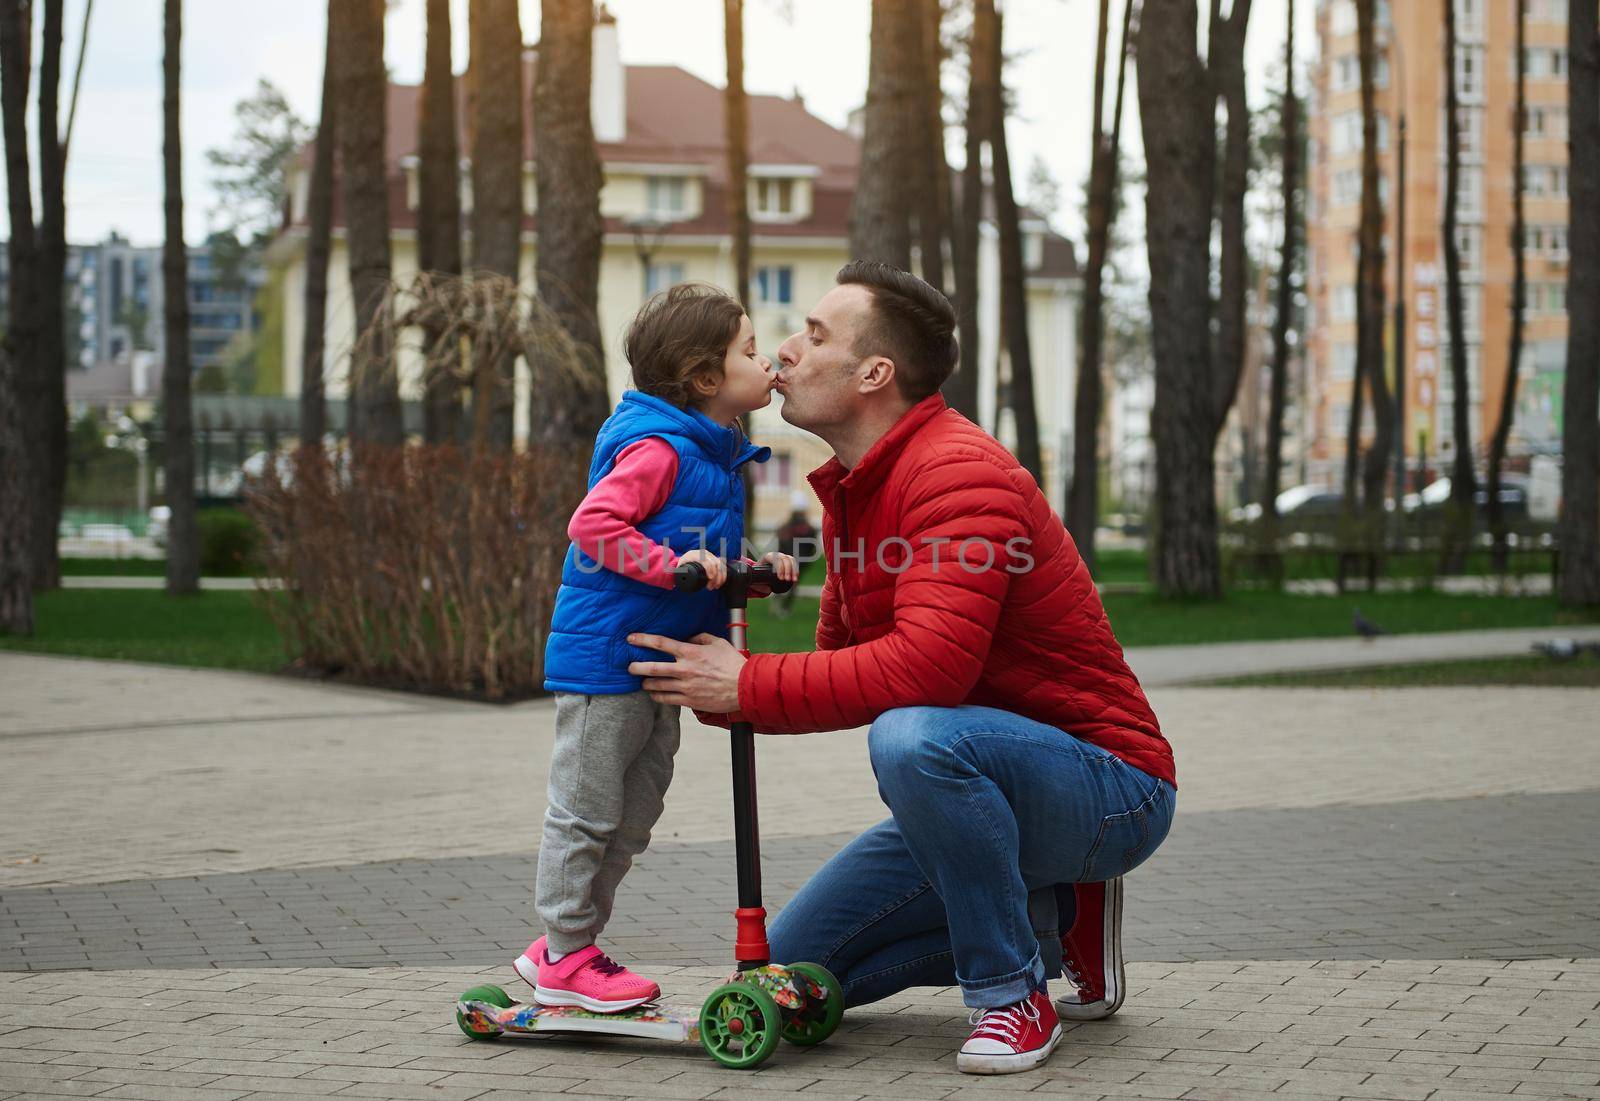 Loving caring dad and his beloved daughter on a push scooter in city park. Kisses, tenderness, love, care, affection togetherness, family relationships, childhood and fatherhood concept. Father's Day